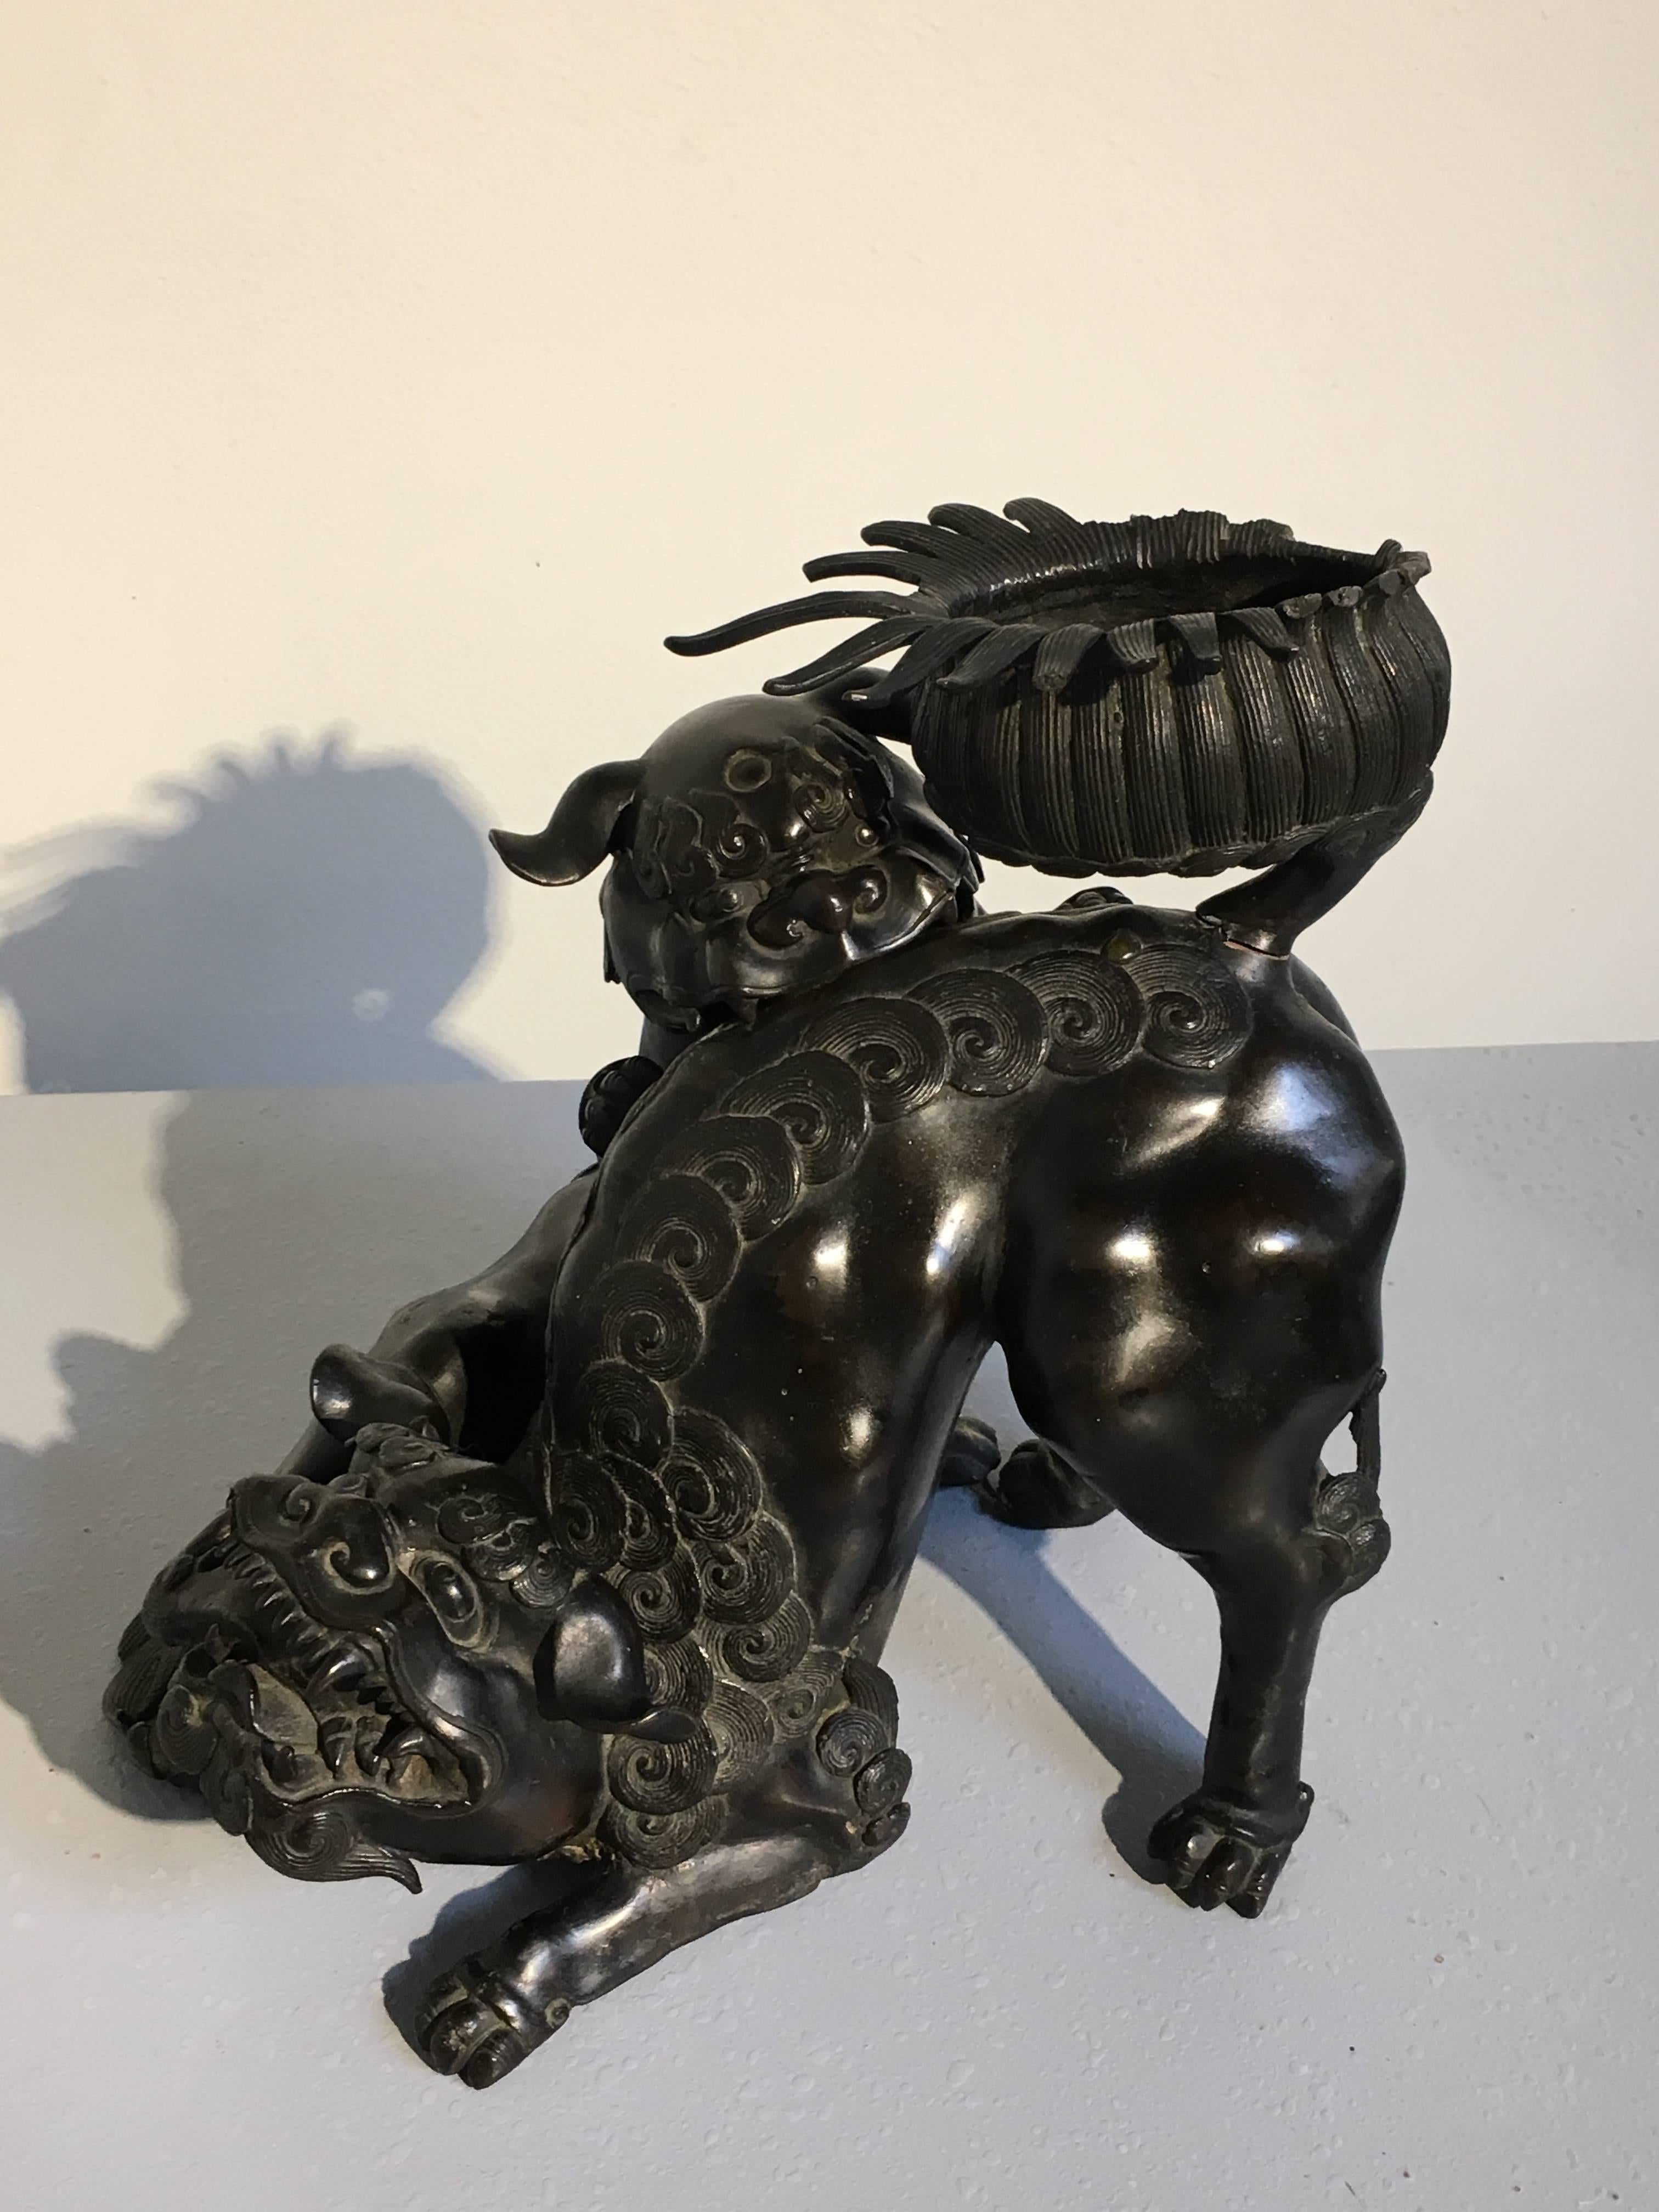 A large and powerfully cast Chinese bronze censer in the form of two Buddhistic lions, Qing dynasty, late 19th century. The censer is well cast with a strong sense of movement, featuring a pair of fierce Buddhistic lions playfully antagonizing each